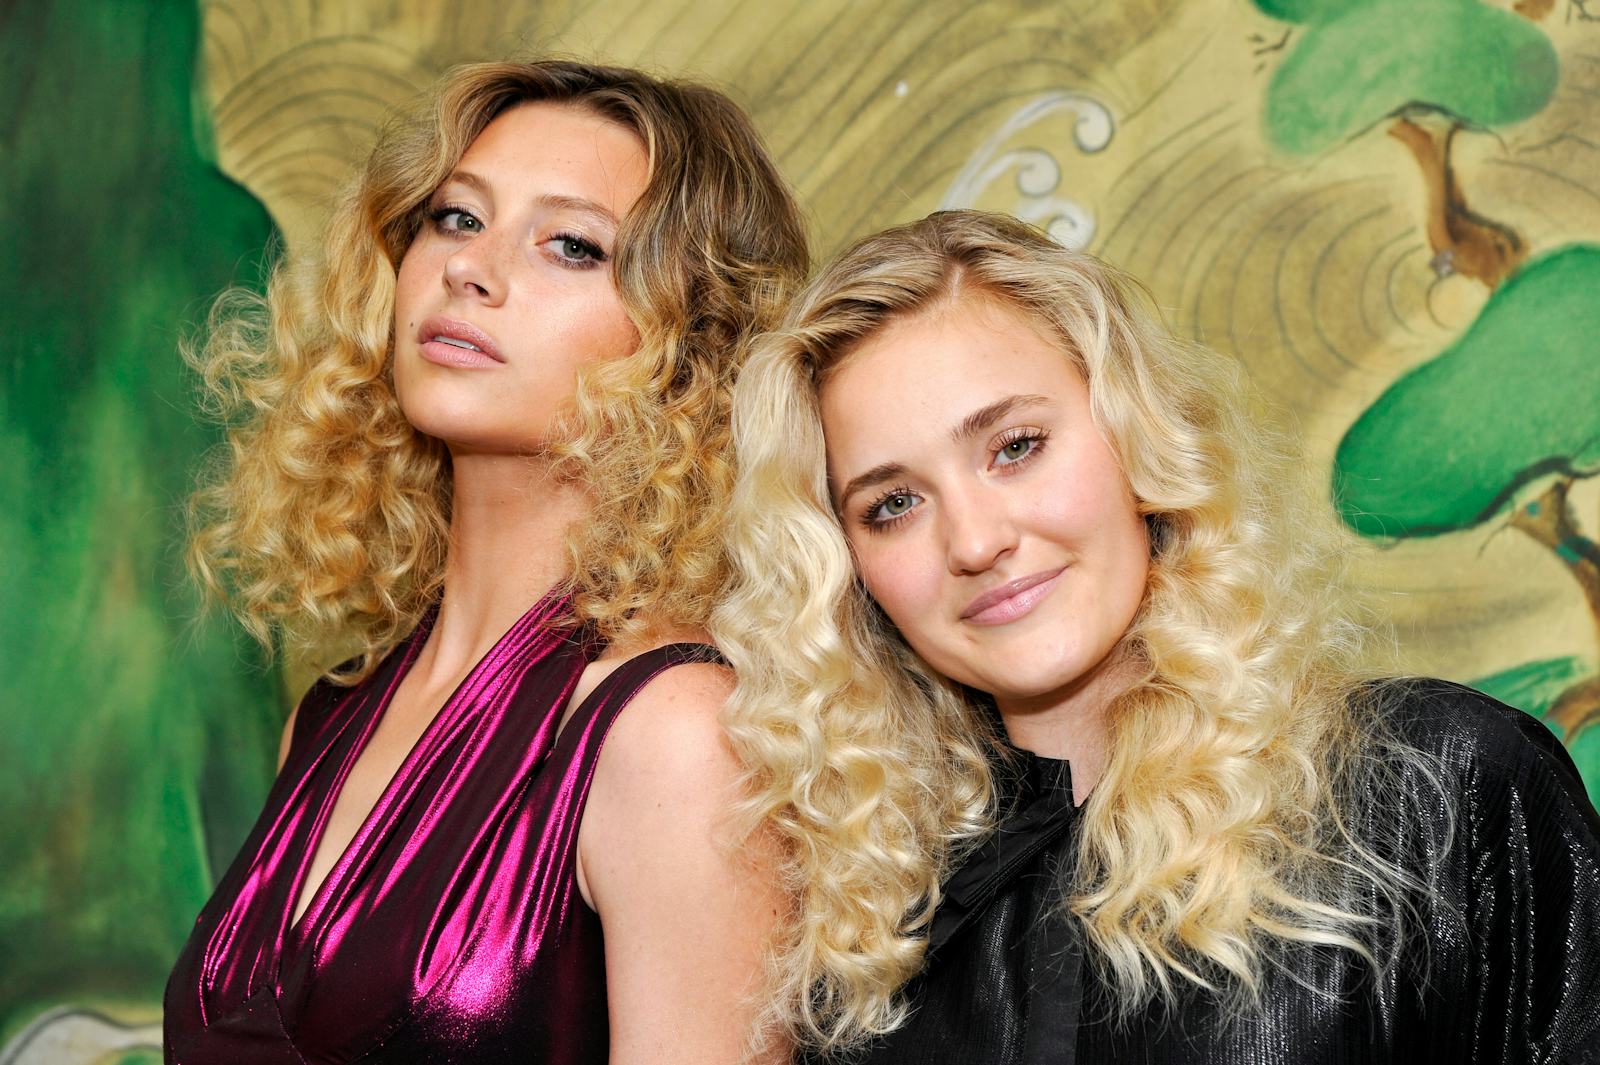 How To Get Tickets To Aly & AJ's New Tour Because The 2000s Nostalgia